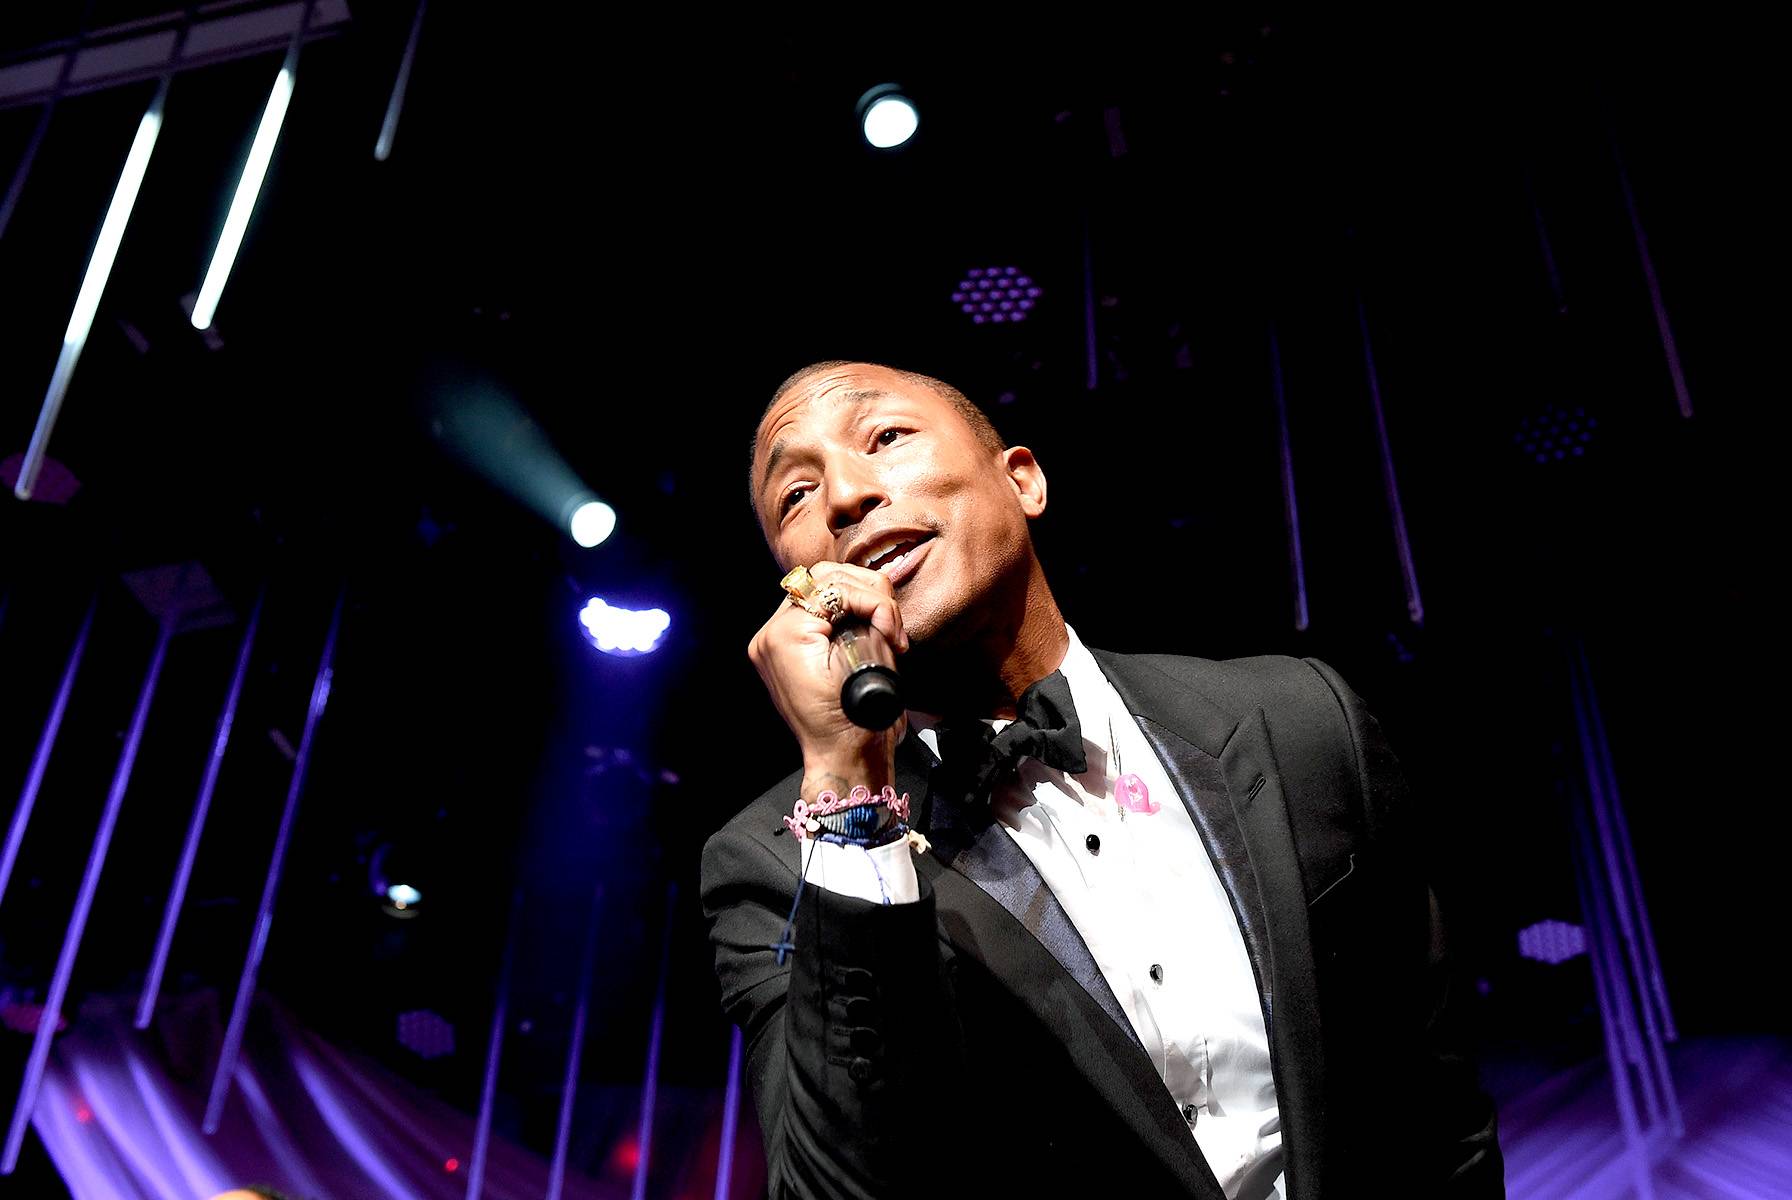 Pharrell Williams is the CFDA Fashion Icon of the year